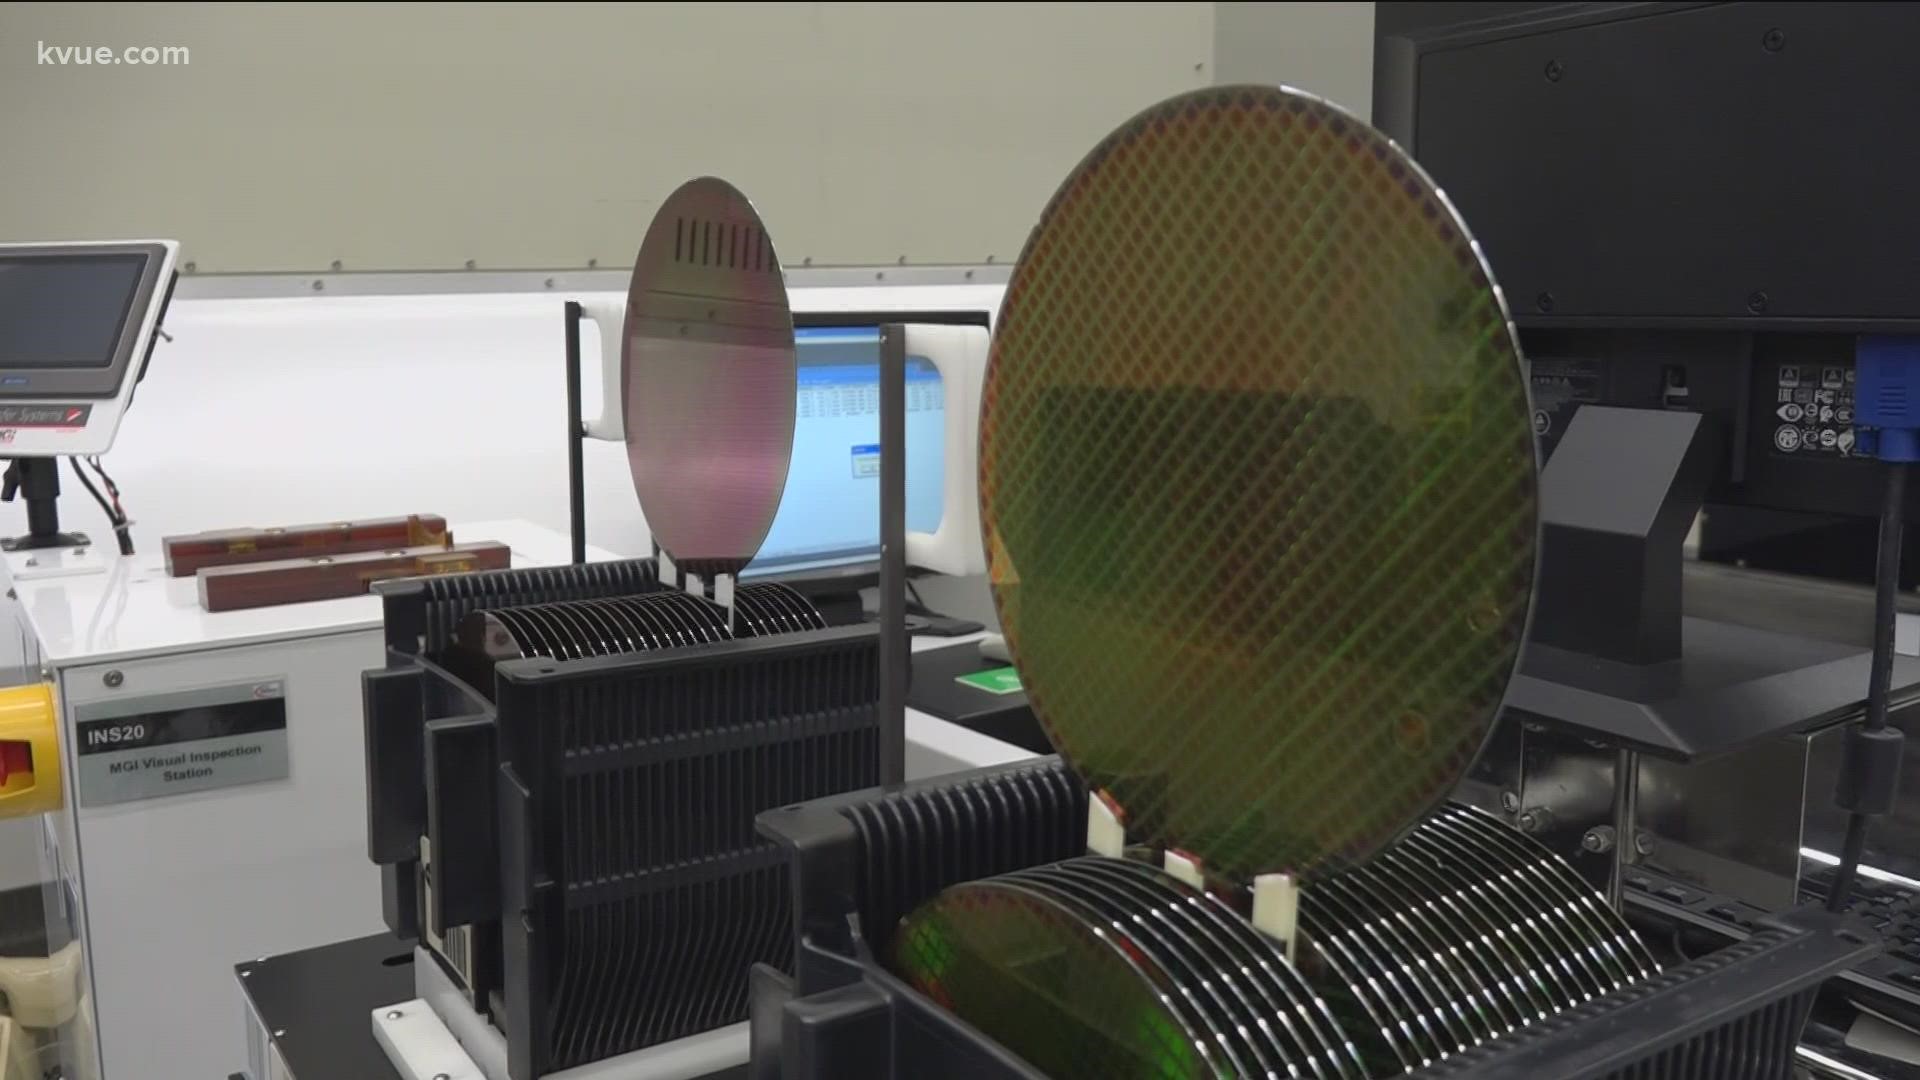 Central Texas has become a hub for semiconductor chip manufacturing in the U.S. KVUE takes you inside a local factory.